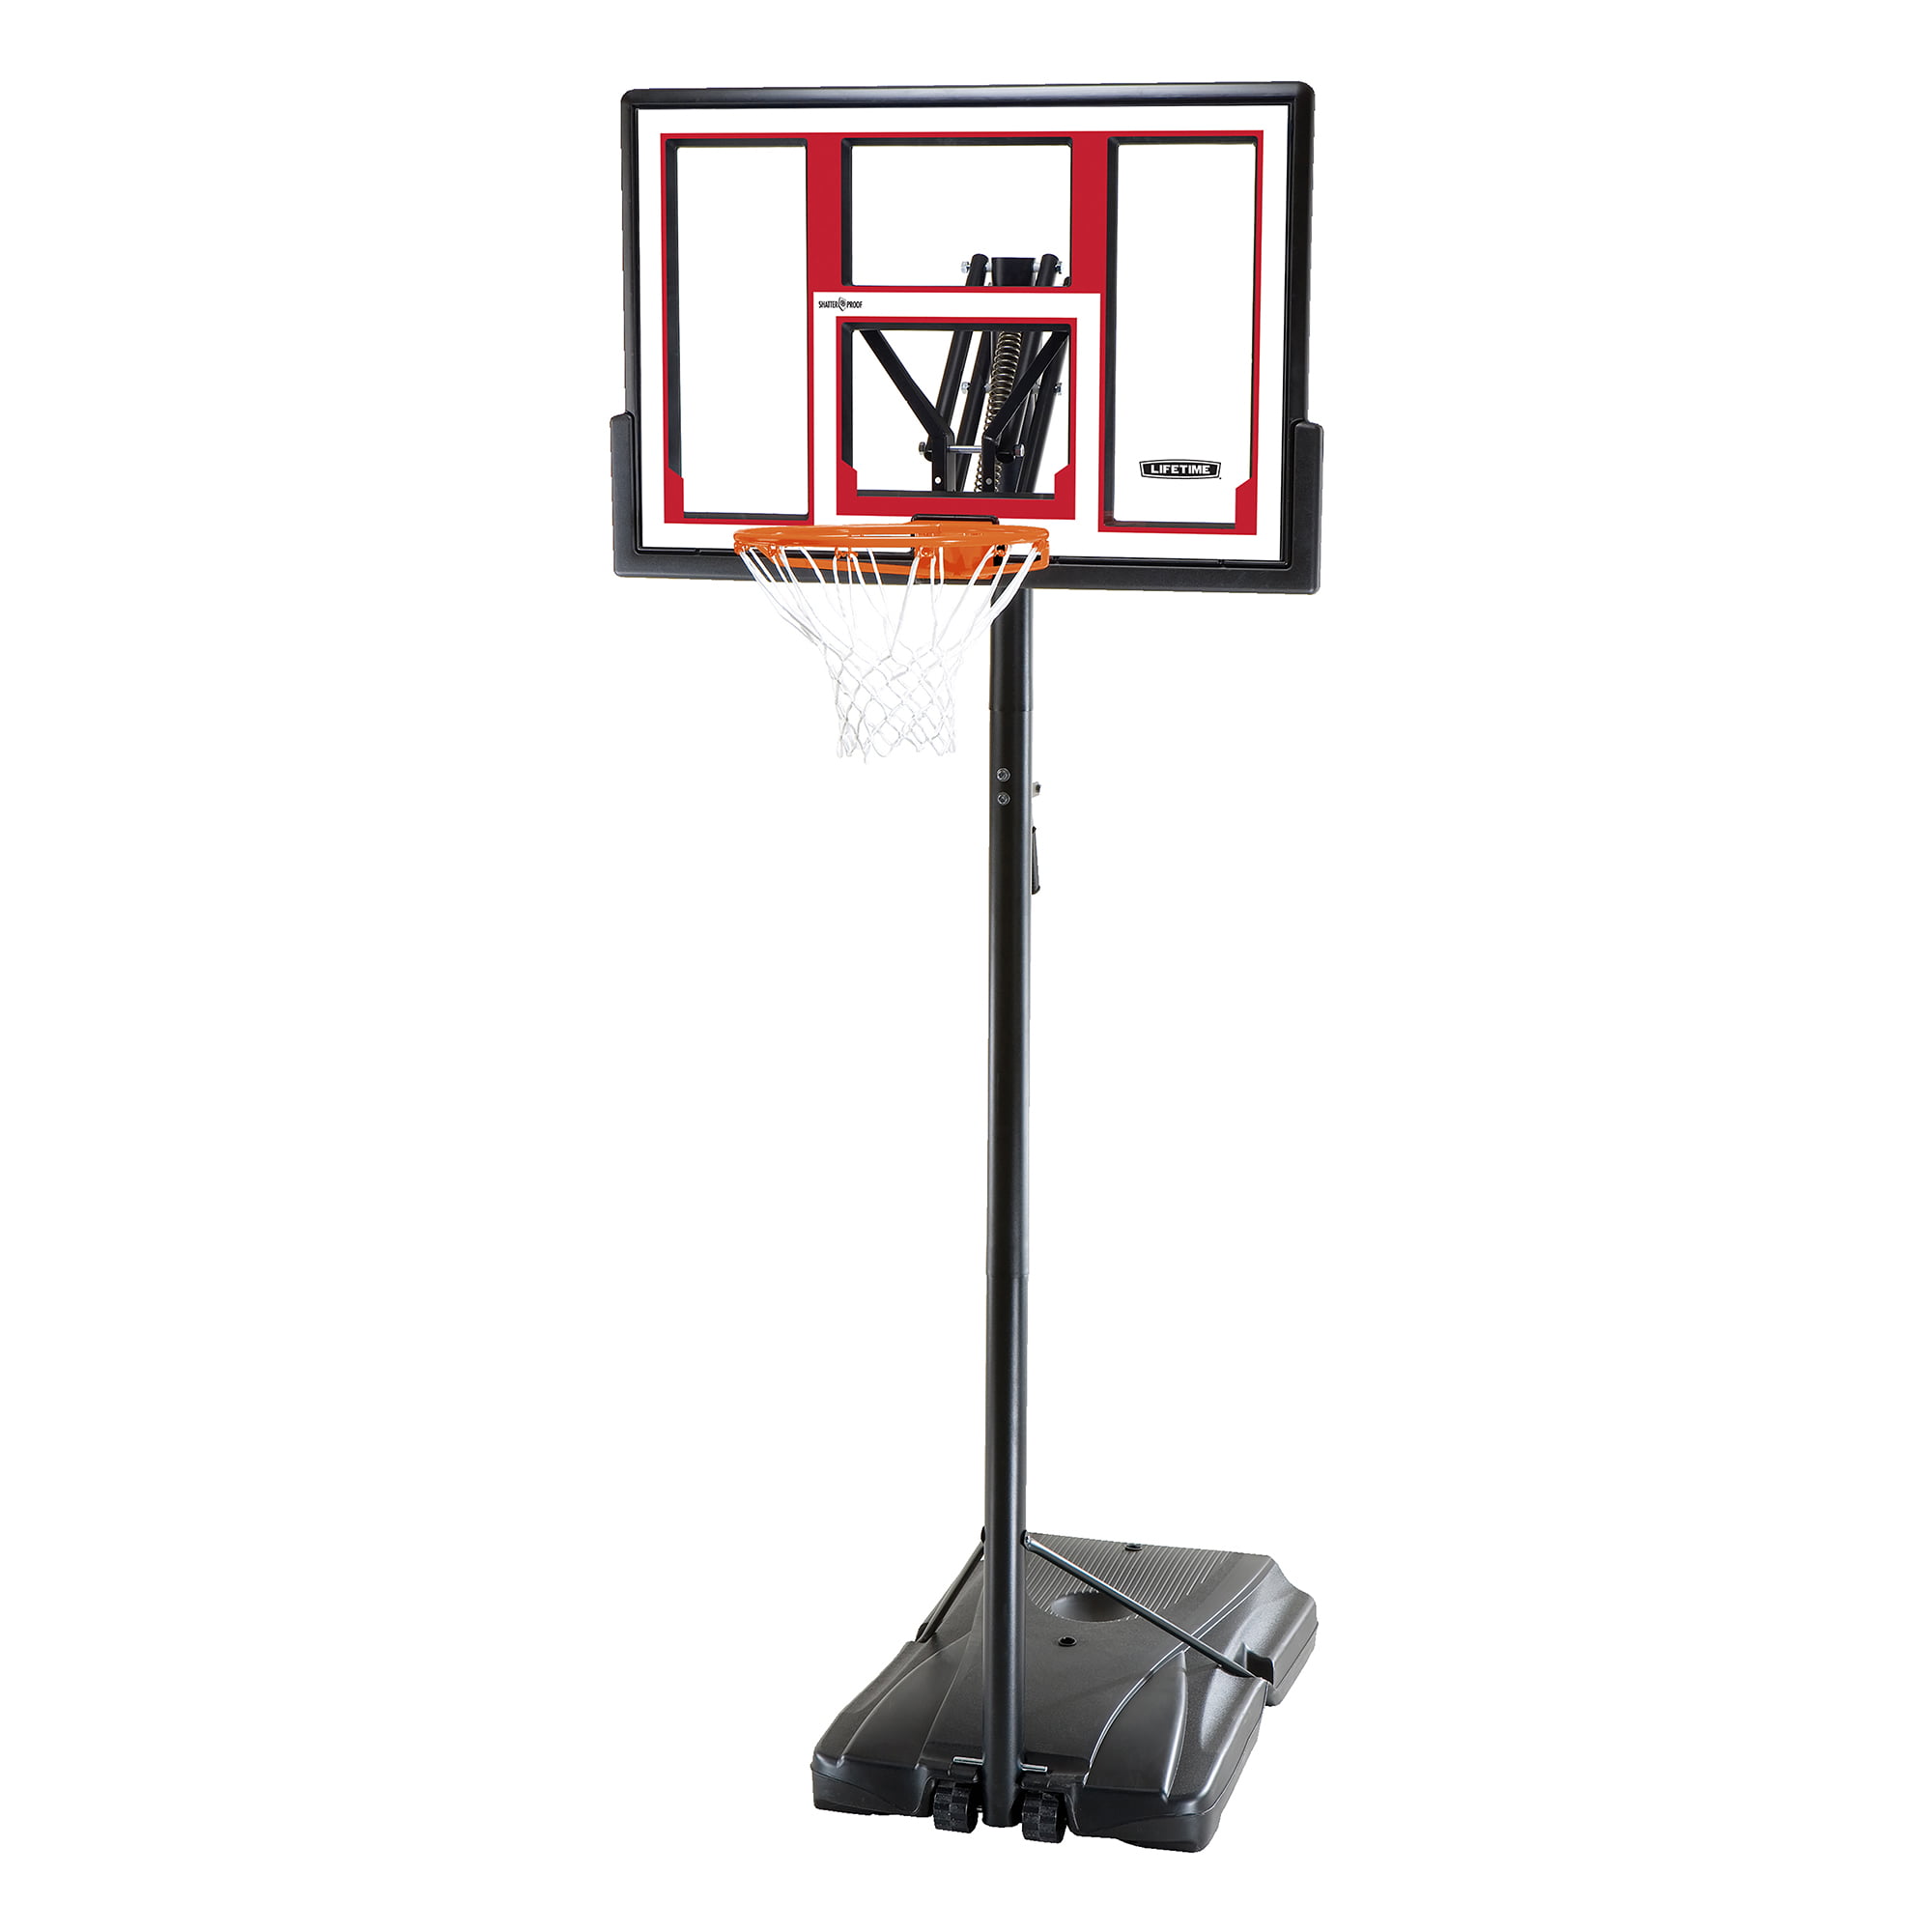 Details about   In Ground Basketball Hoop System Adjustable 44 In Shatterproof Acrylic Backboard 